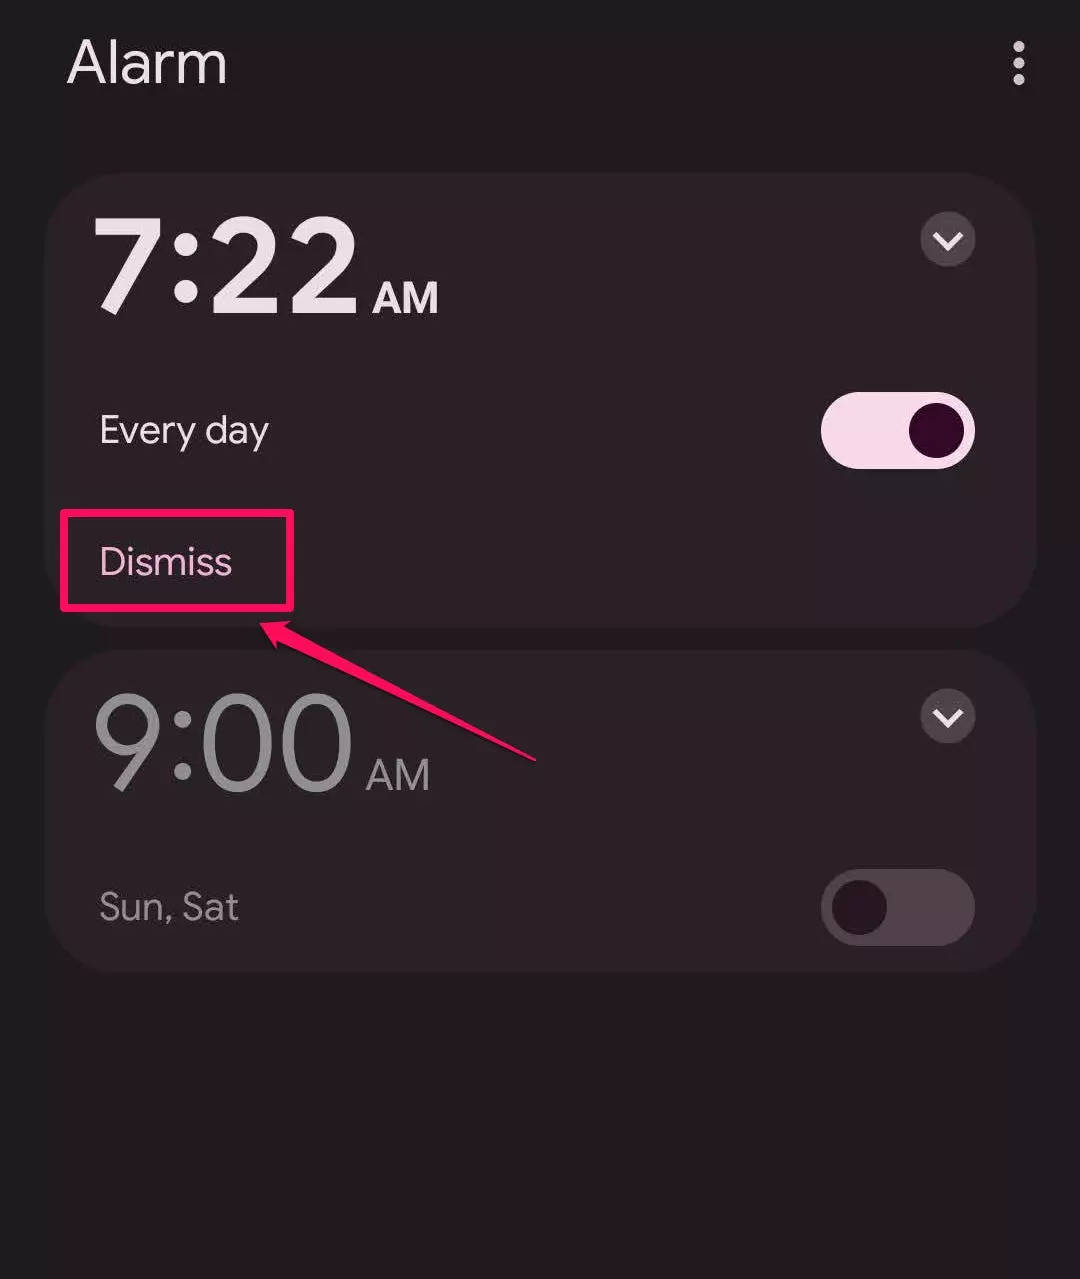 How to cancel or delete an alarm on an Android or iPhone